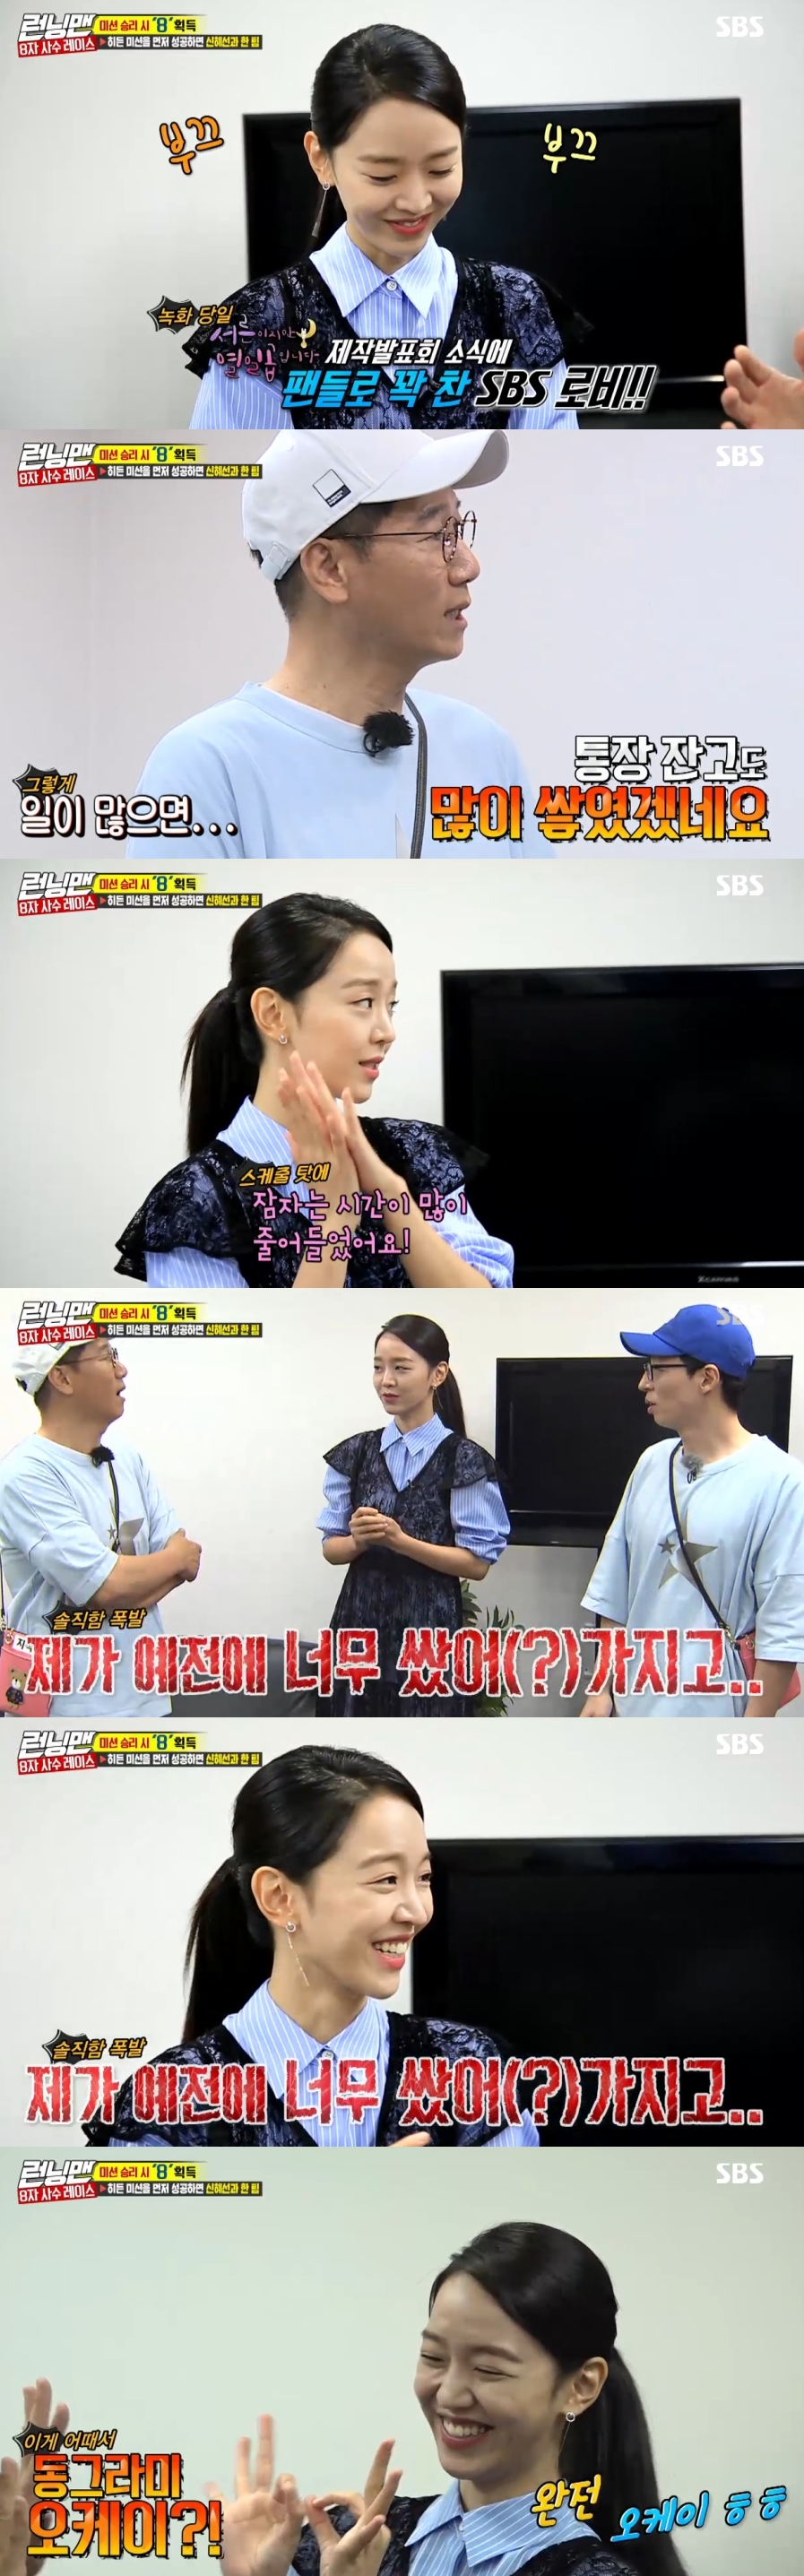 Actor Shin Hye-sun made a surprise appearance in Running Man.On August 5, SBS Running Man revealed the appearance of Ji Suk-jin Yoo Jae-Suk, who visited the entertainer who was born in August.On this day, Shin Hye-sun asked about the difference before and after gaining popularity, saying, I have lost a lot of sleep.As for the account balance, he said, I do not earn a lot now, but because the ransom was too cheap in the past.Park Ah-reum 